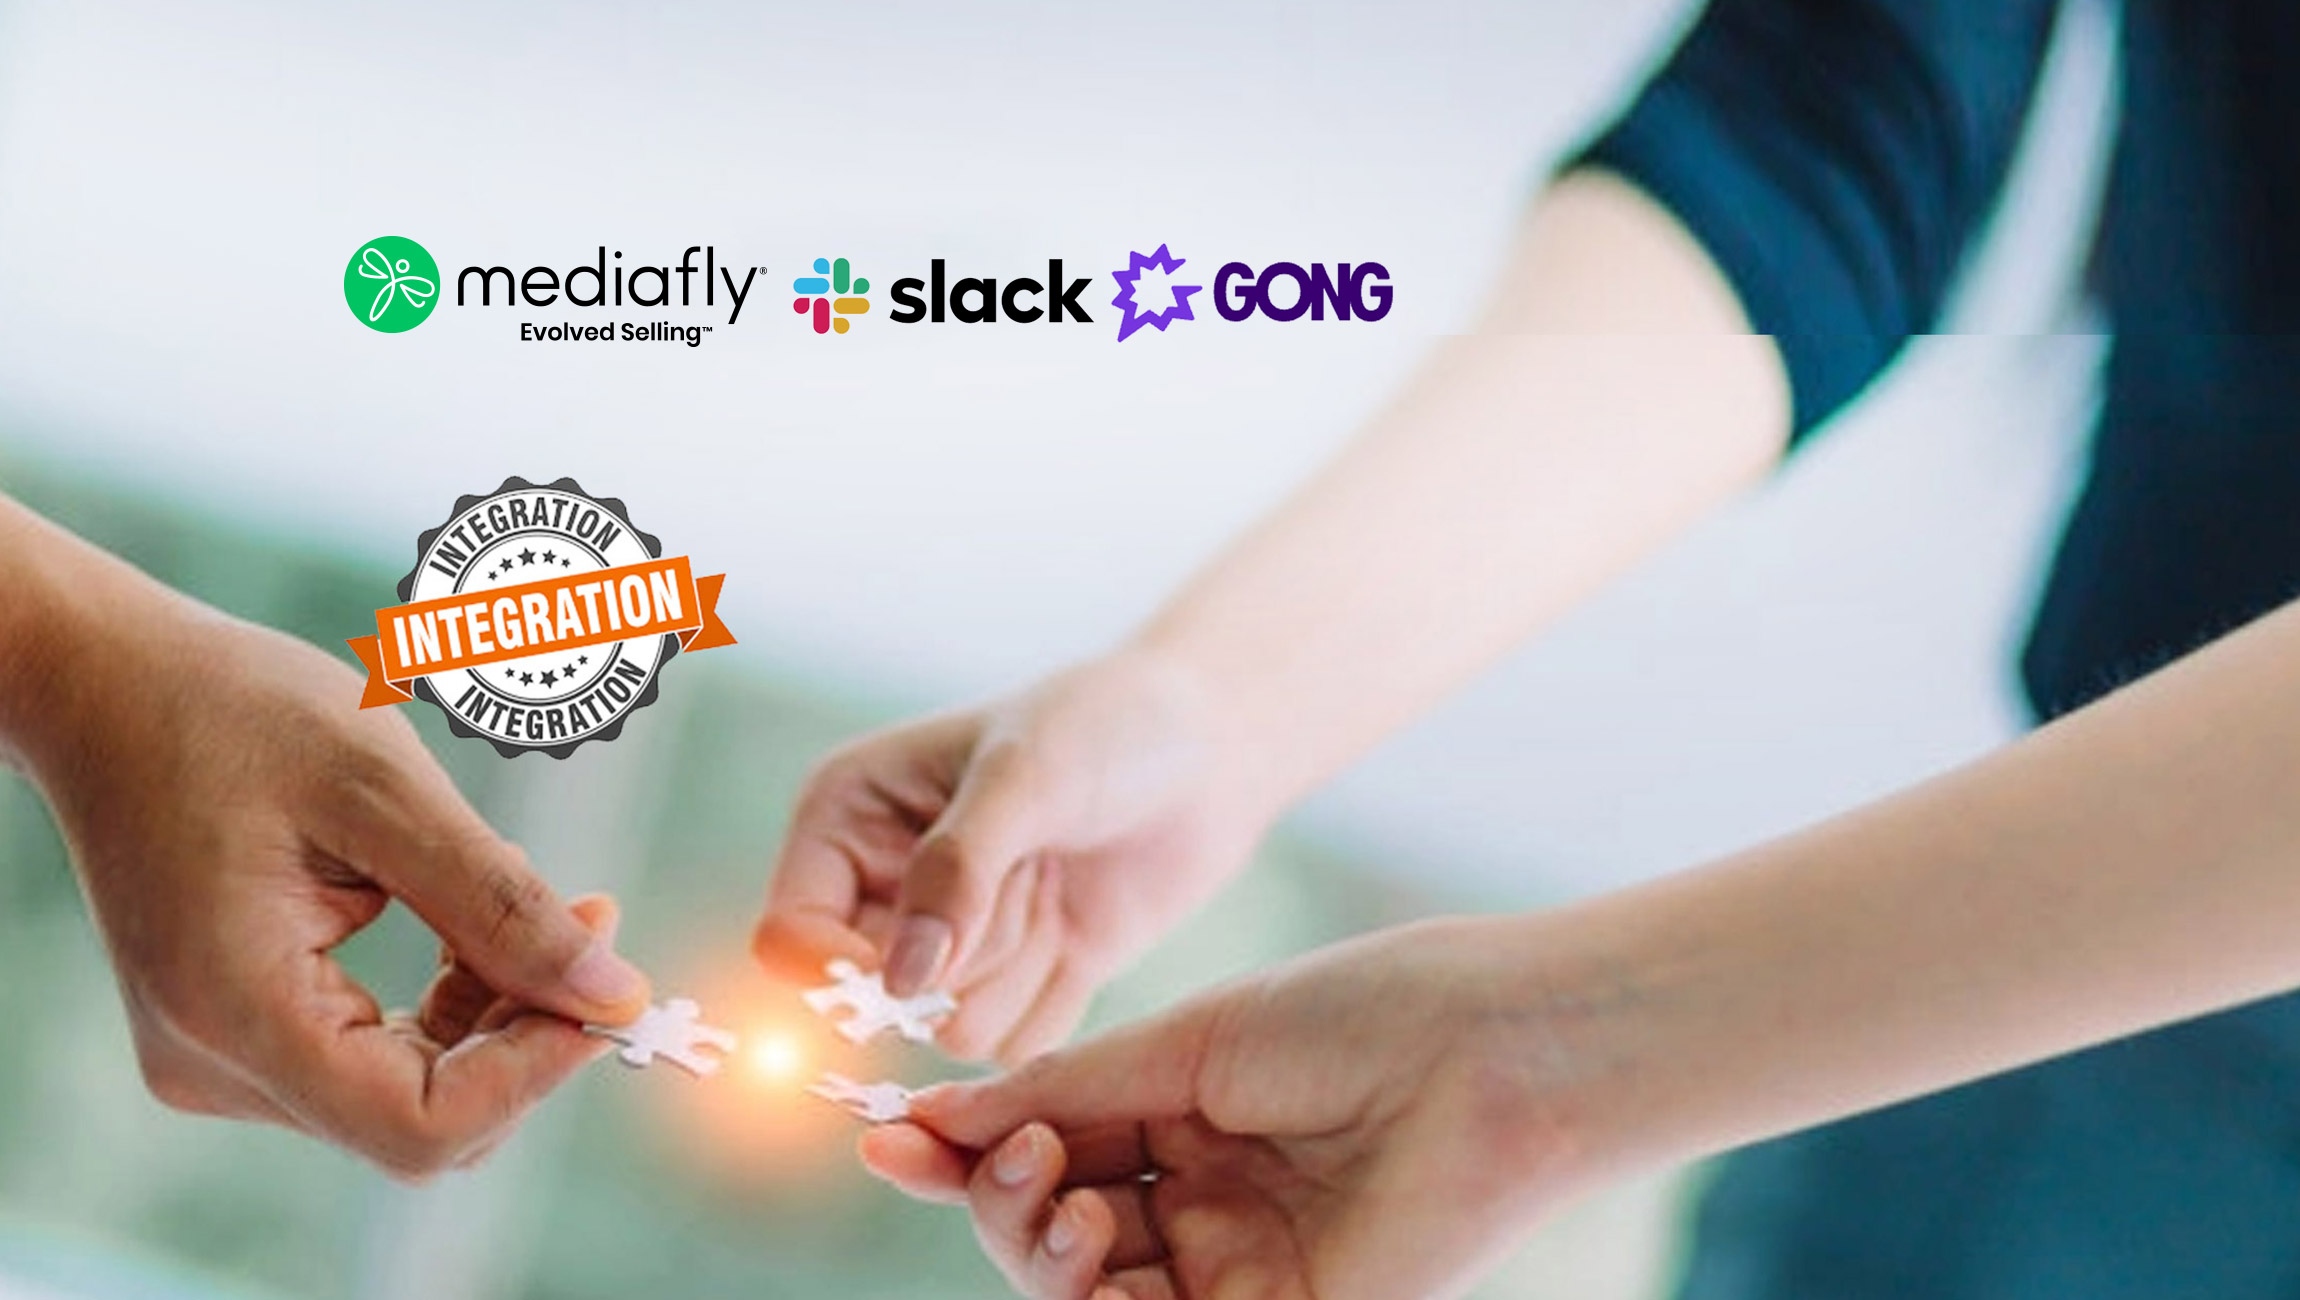 Mediafly-Announces-Integrations-with-Slack-and-Gong_-Further-Enhances-Digital-Selling-Experience